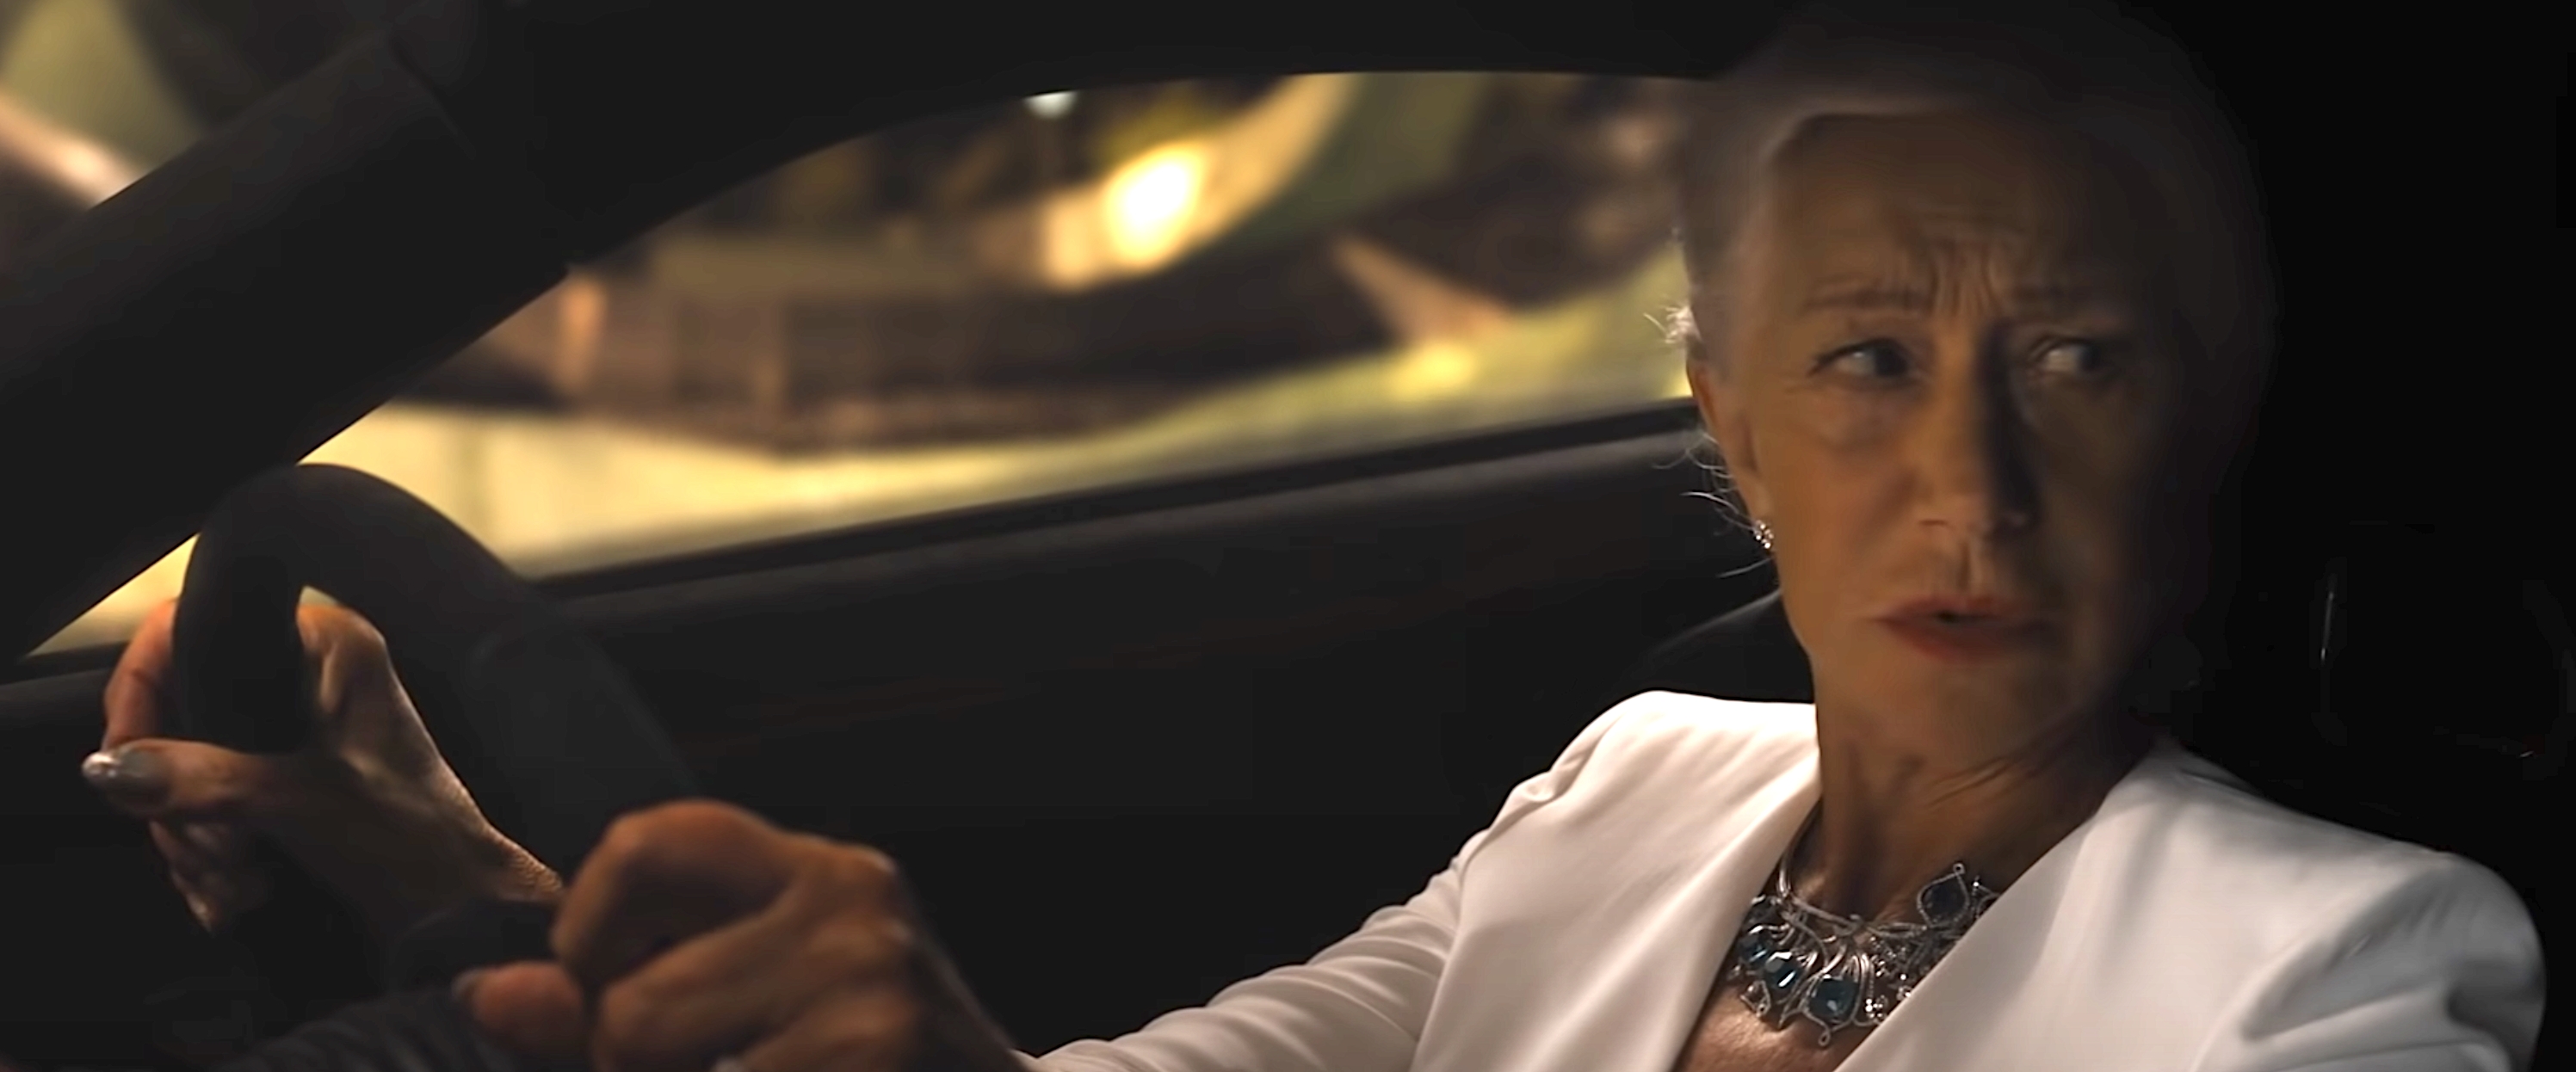 The Rundown: Finally, At Long Last, The ‘Fast & Furious’ Franchise Will Let Helen Mirren Drive